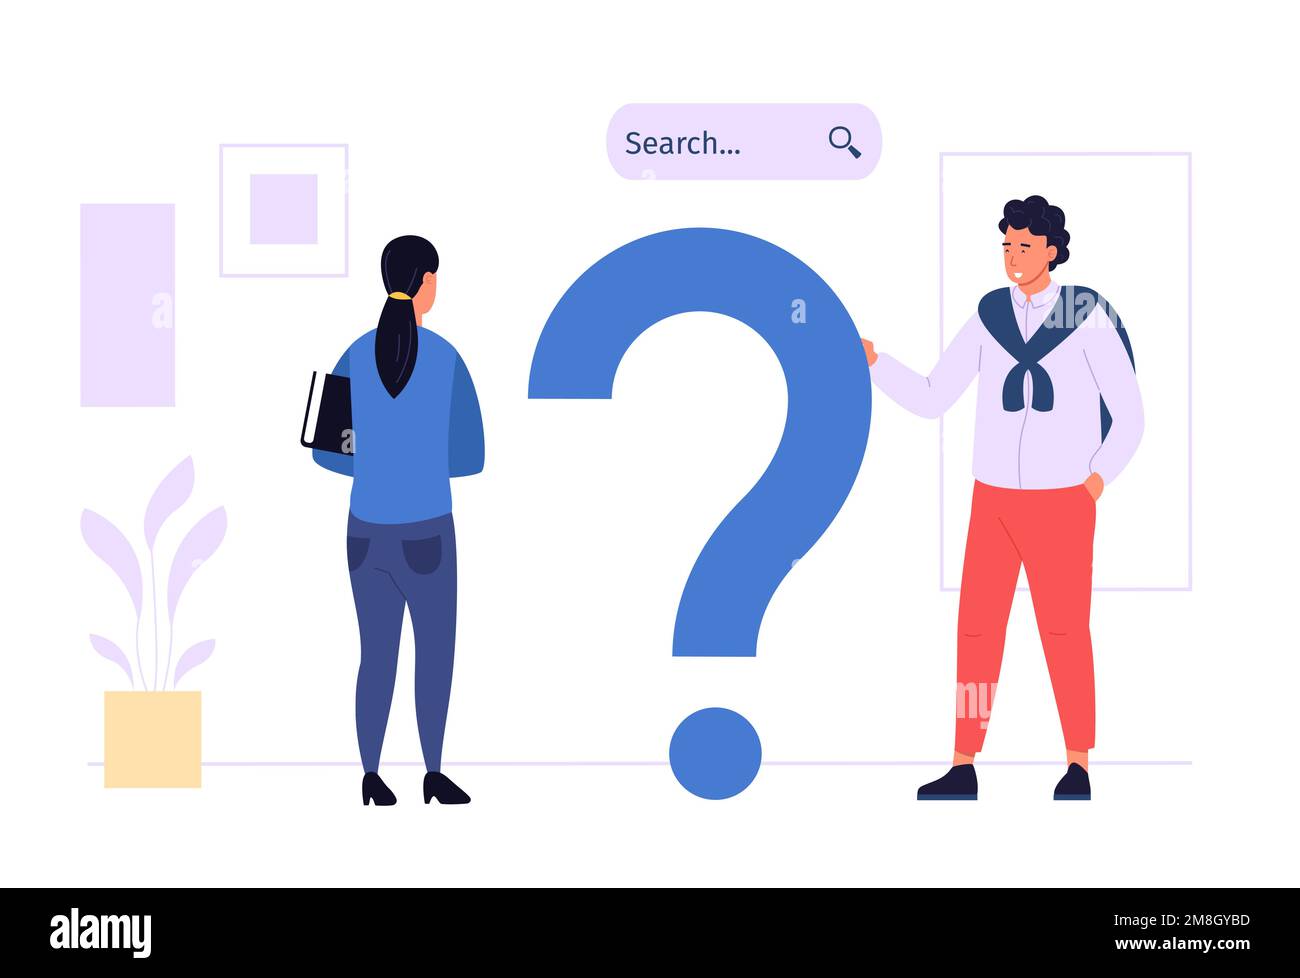 Online question answers search. Male and female characters looking for solution in internet, solving problems Stock Vector